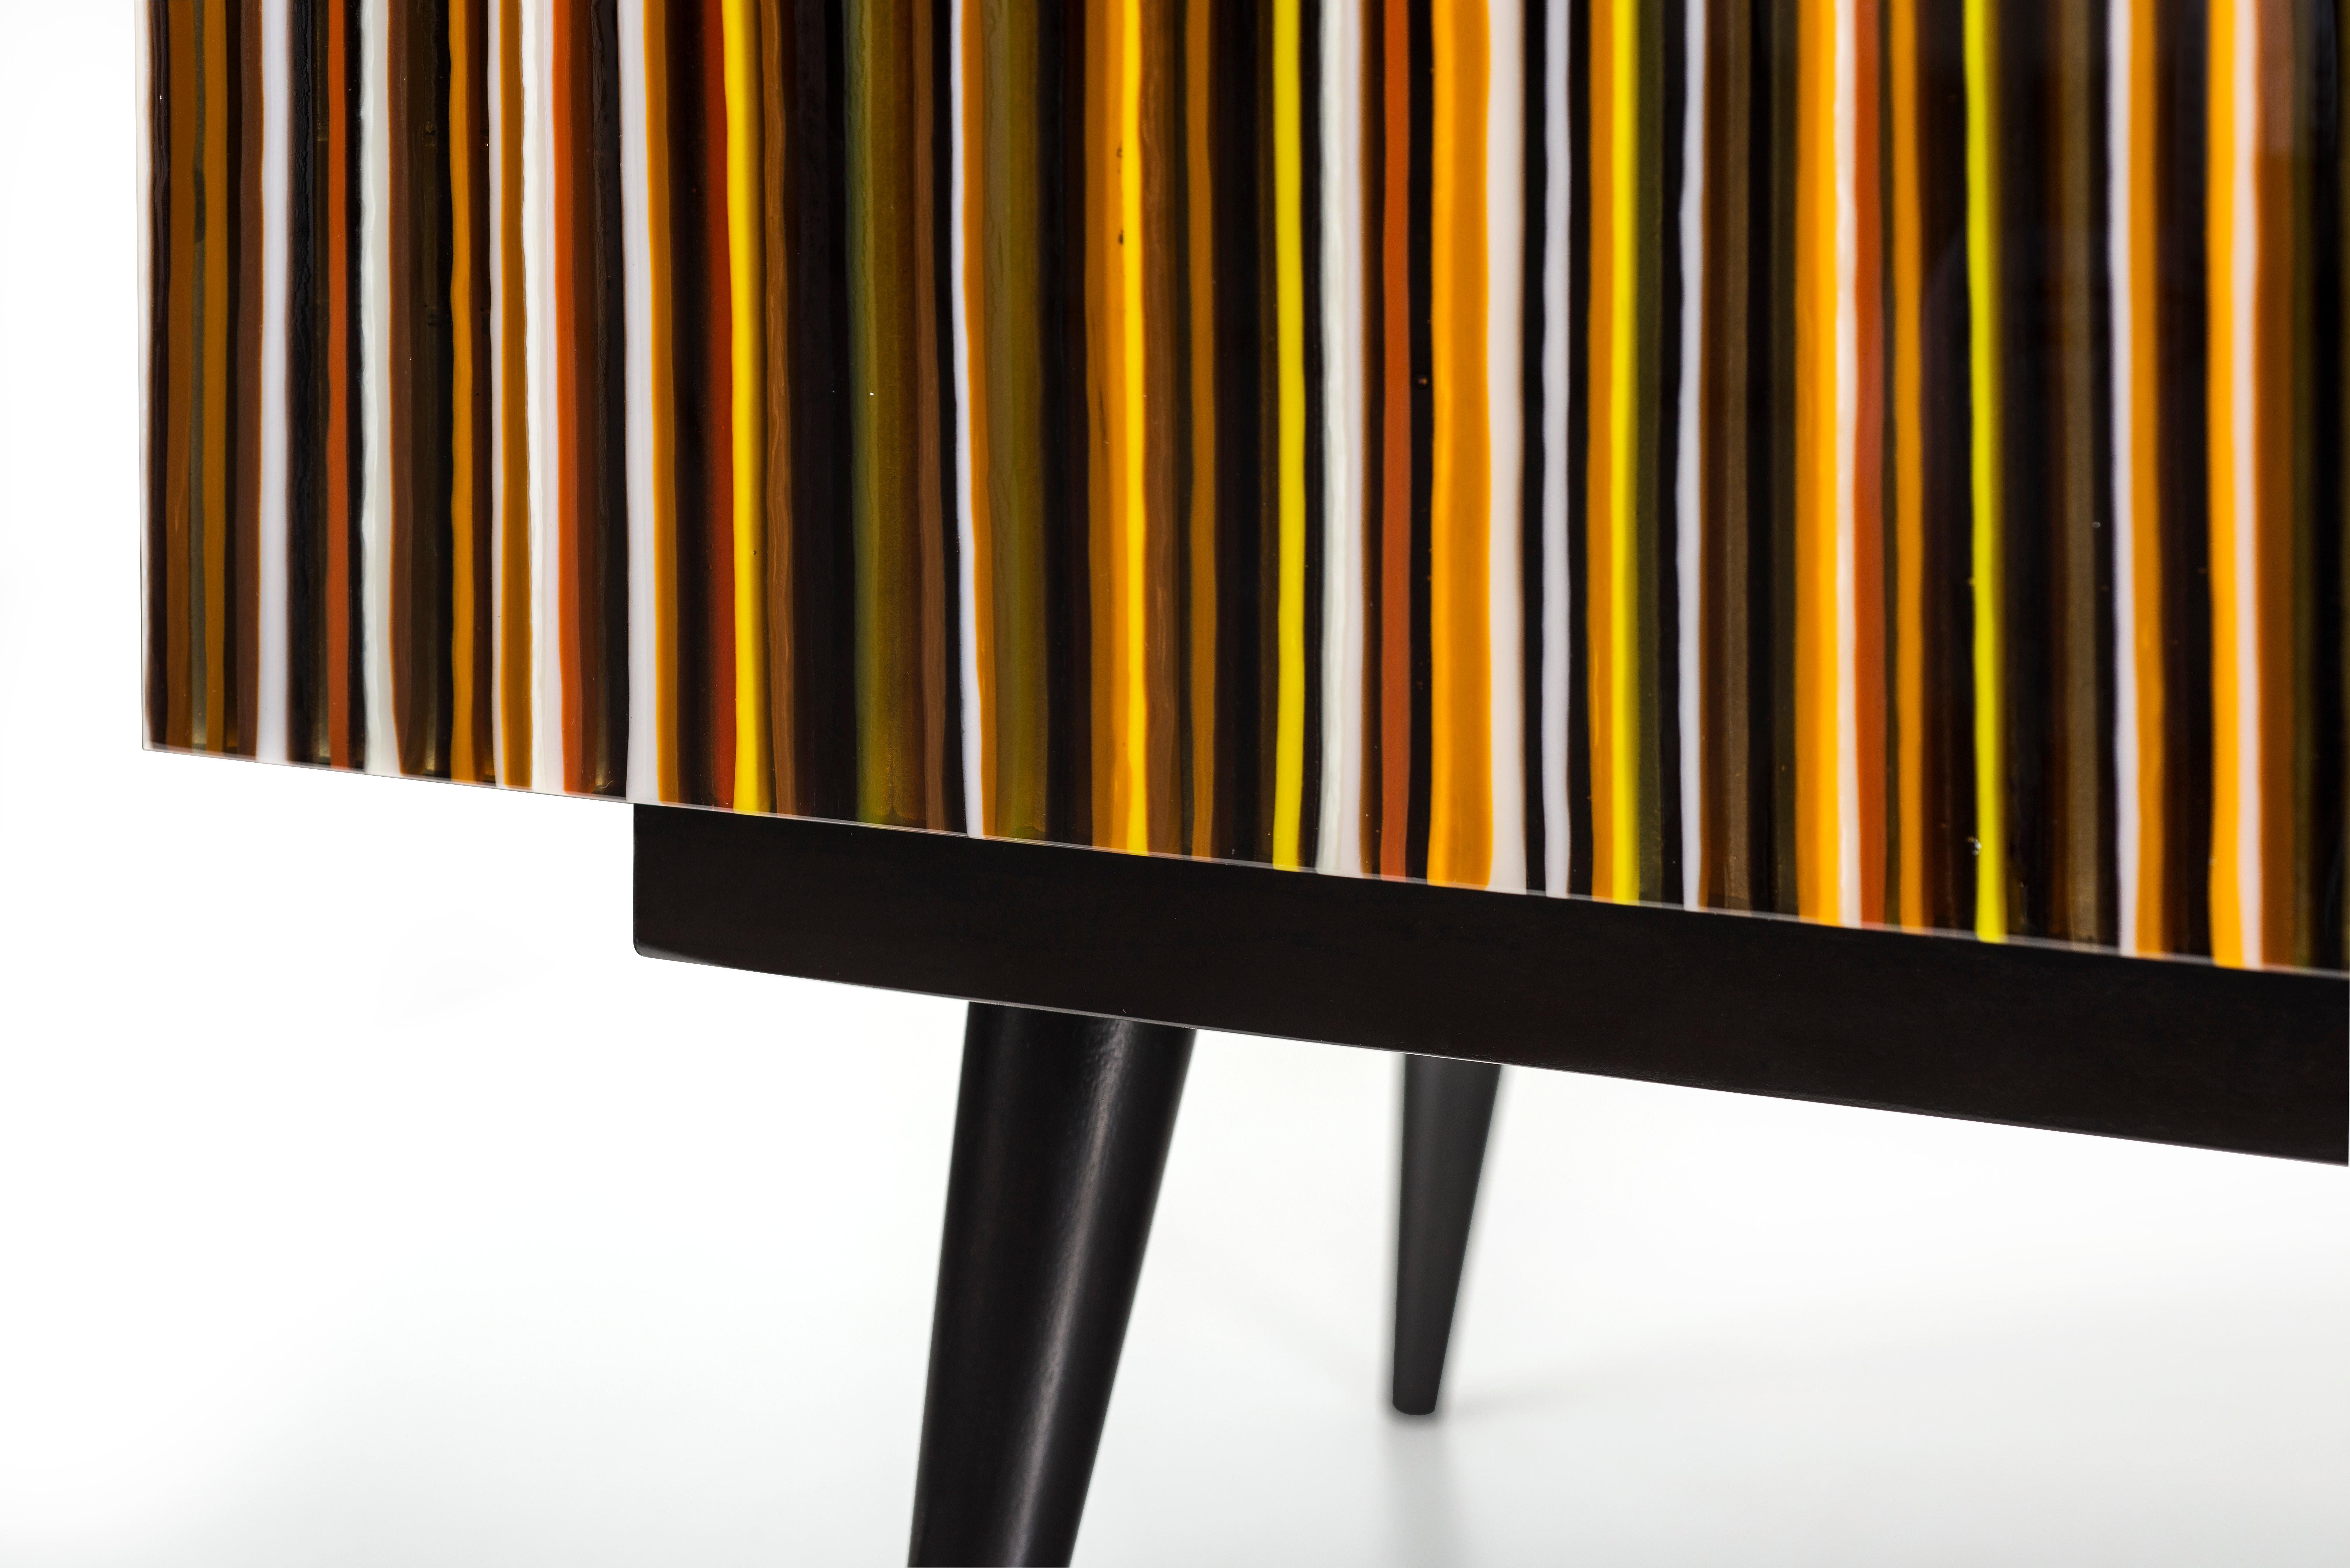 The Buff-Heyyy is a retro-style credenza designed by Orfeo Quagliata in collaboration with Taracea Furniture. An object of fused glass created with the exclusive barcode technique. The Buff-Heyyy´s retro design mixed with the designer's exceptional